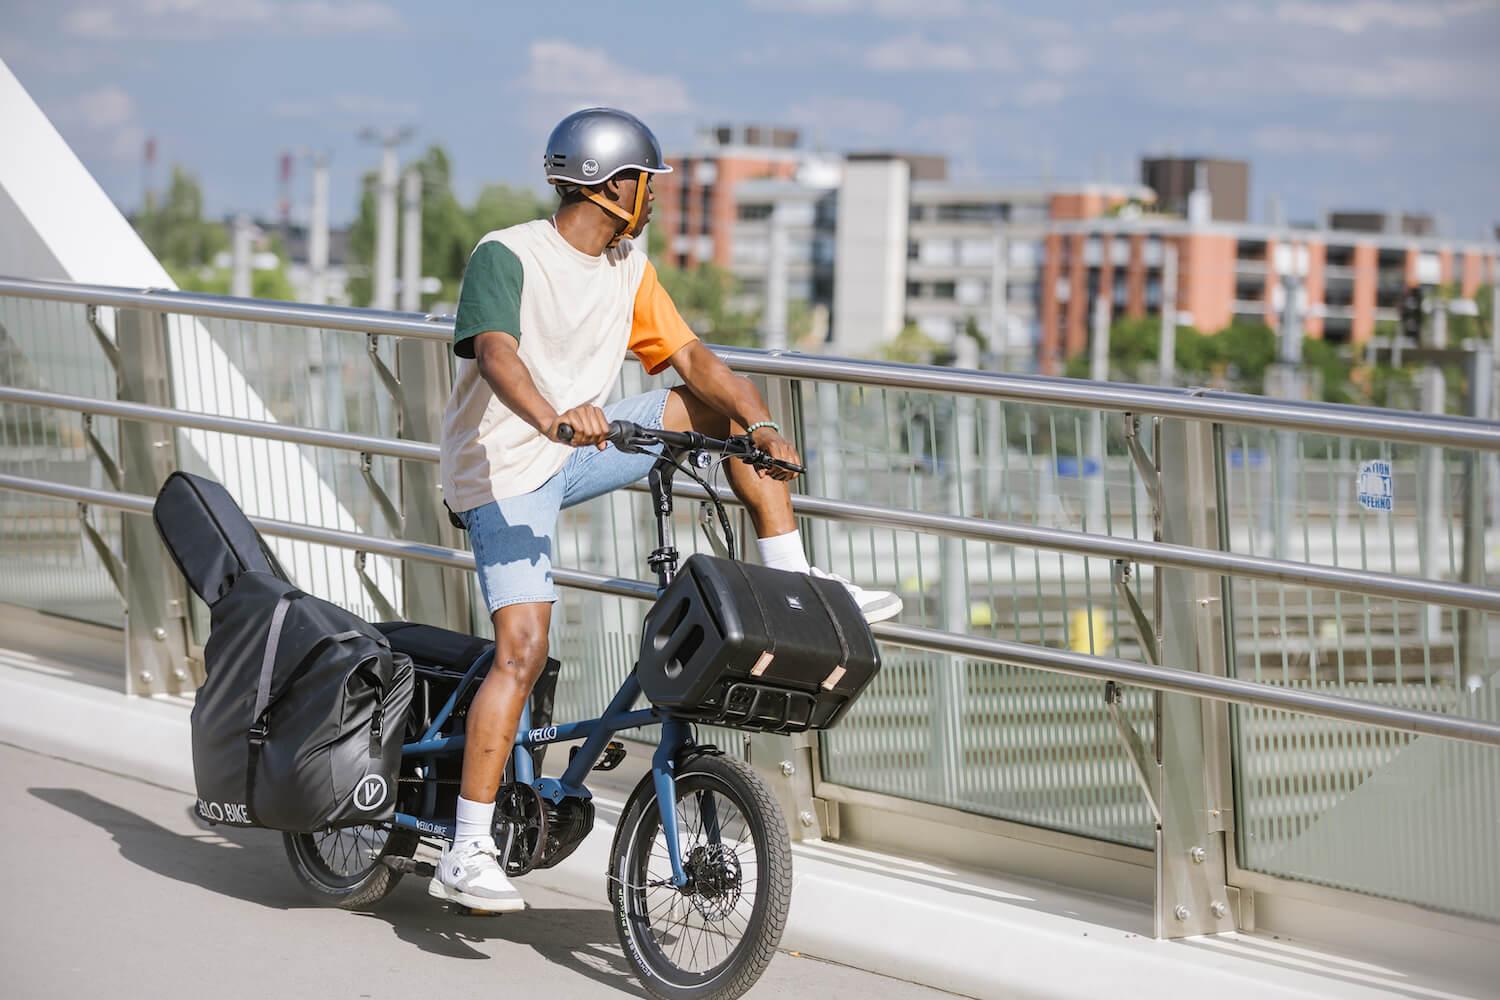 Vello Sub Is a Family Van on Two Wheels, Claims To Be the World's Lightest Cargo E-Bike